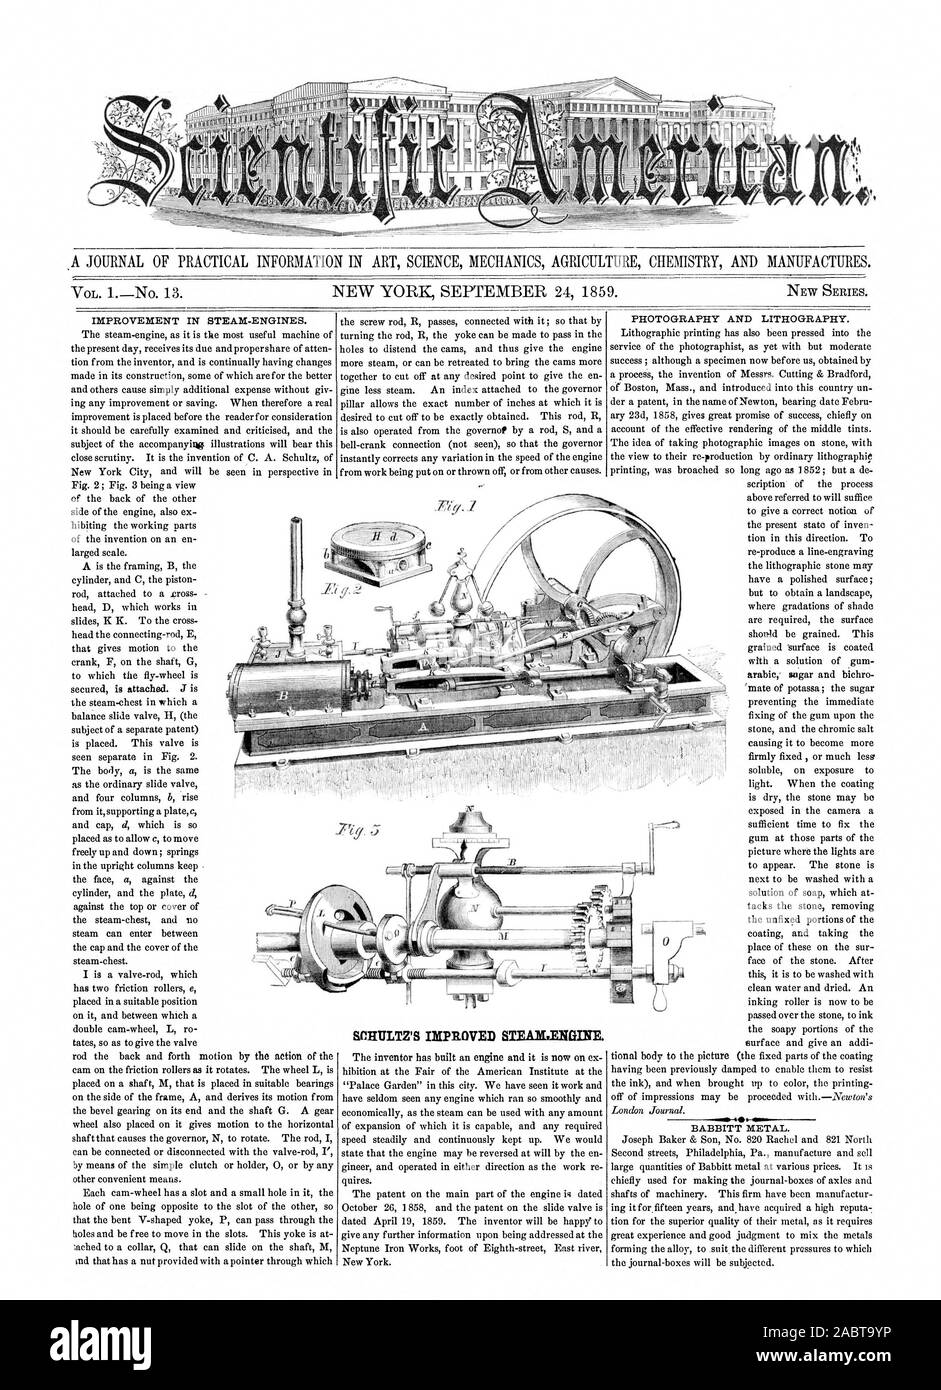 SP)' 01  IMPROVEMENT IN STEAM-ENGINES. SCHULTZ'S IMPROVED STEAMENGINE. PHOTOGRAPHY AND LITHOGRAPHY. BABBITT METAL., scientific american, 1859-09-24 Stock Photo